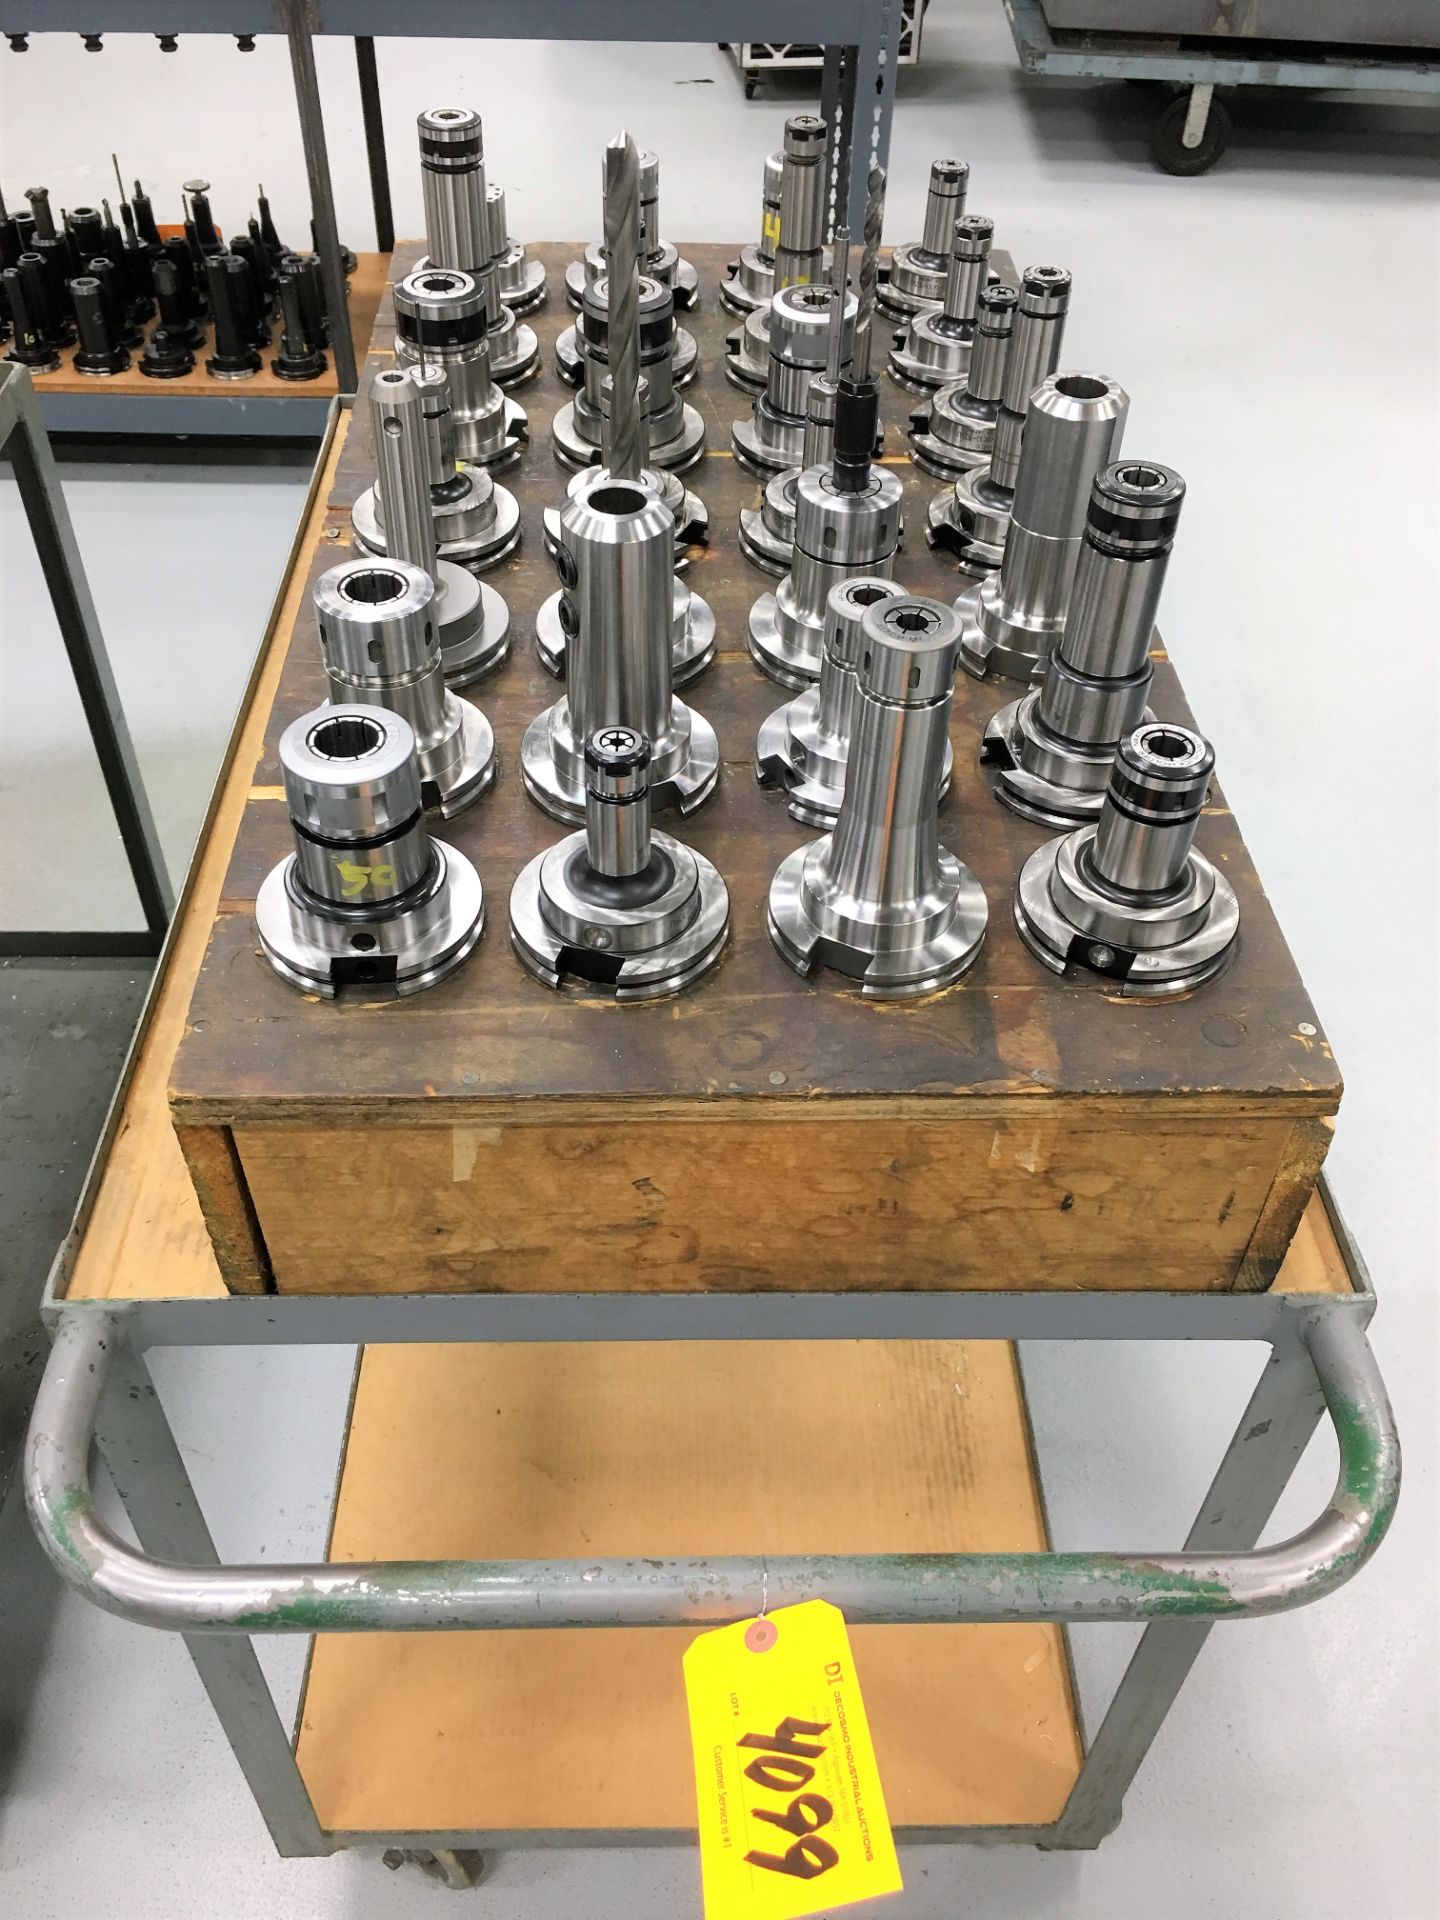 (28) LYNDEX-NIKKEN #CT-50 CNC TOOL HOLDERS WITH CART